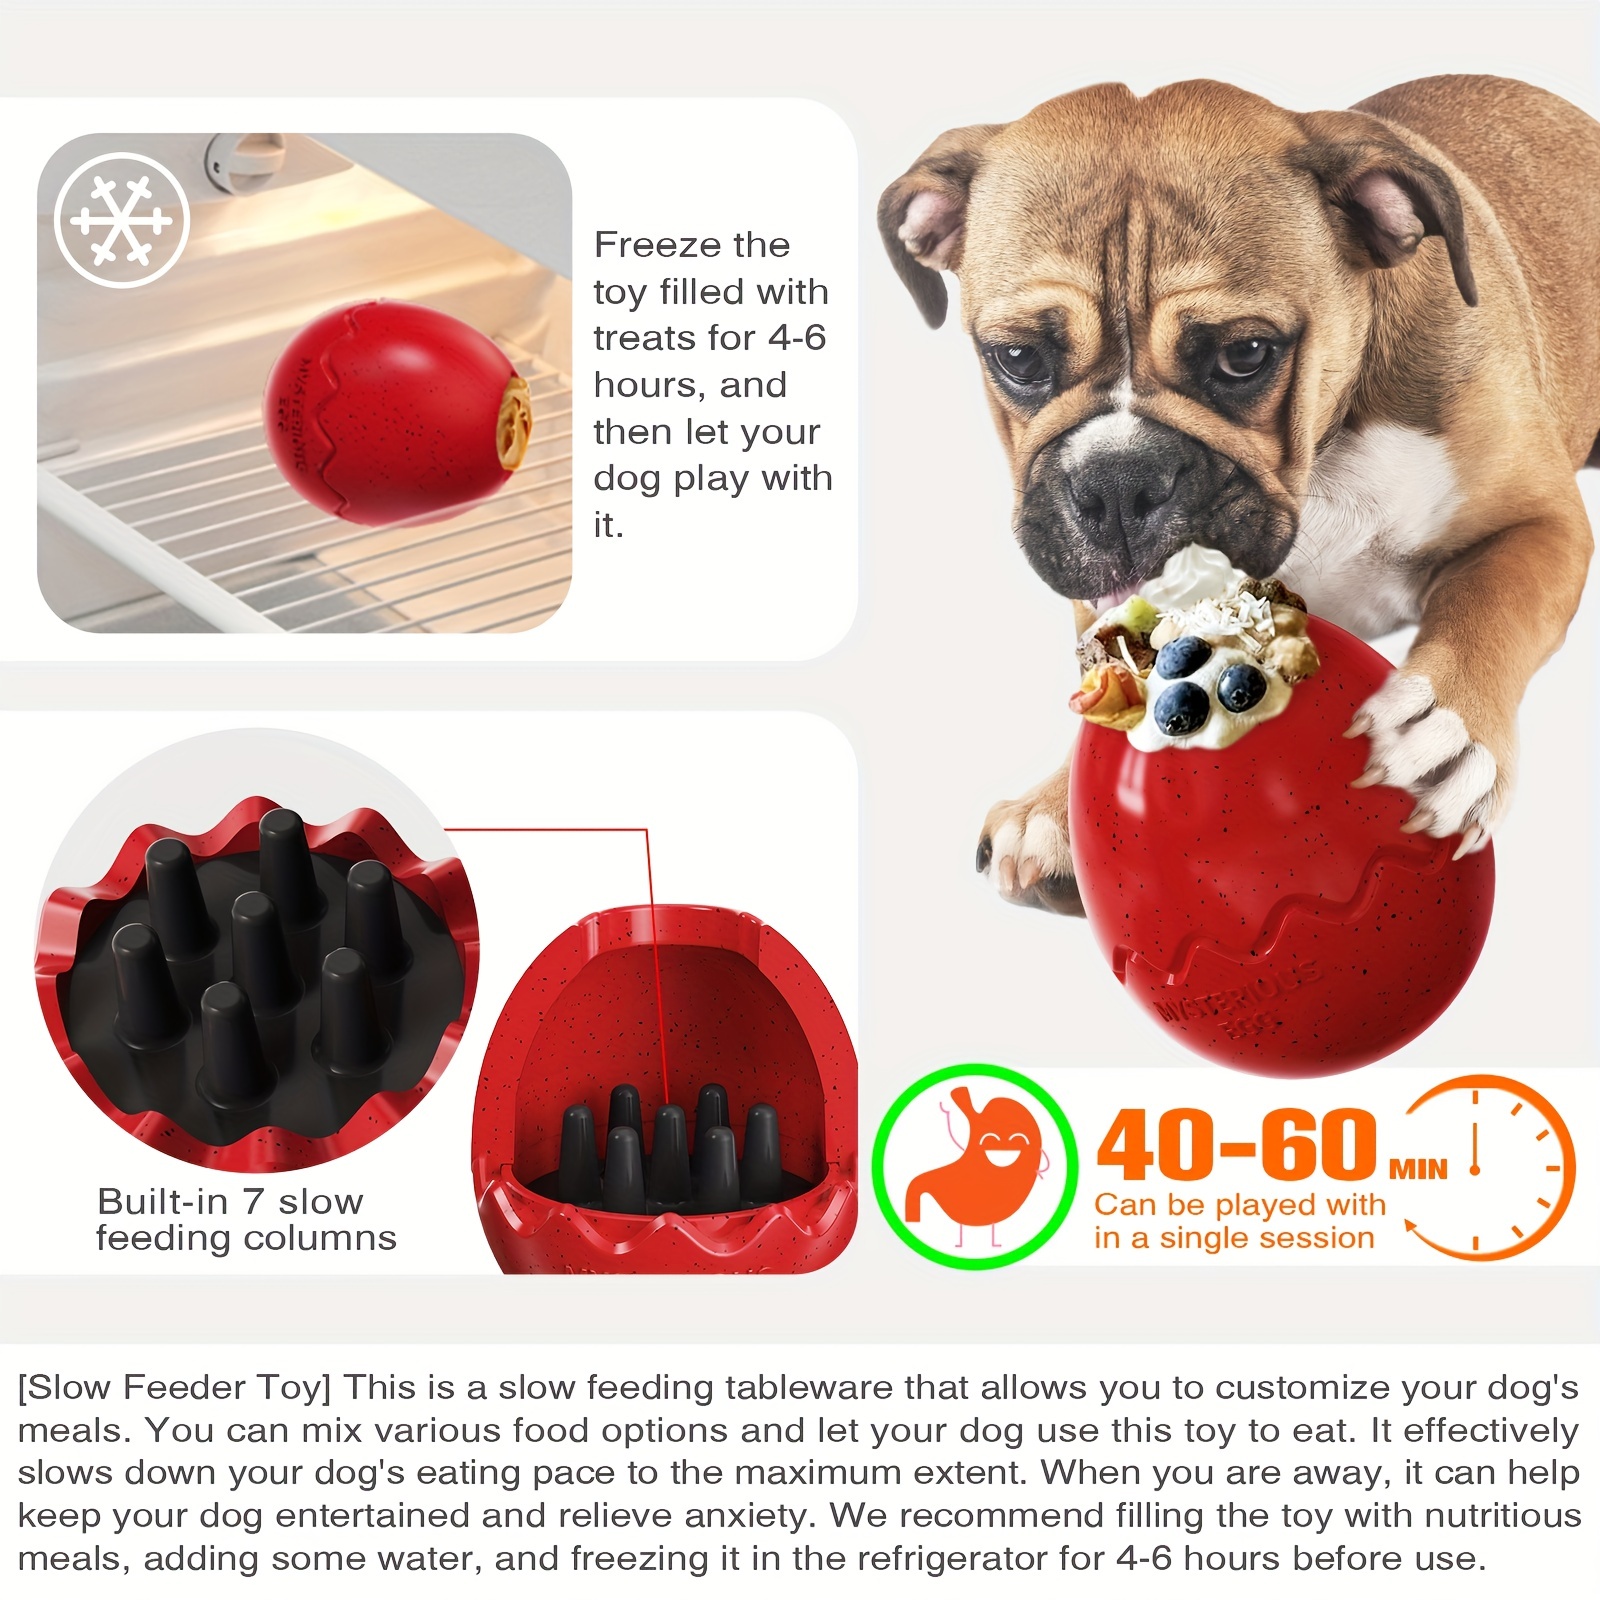 KONG Wobbler - Dog Food & Treat Feeder and Interactive Dog Toy